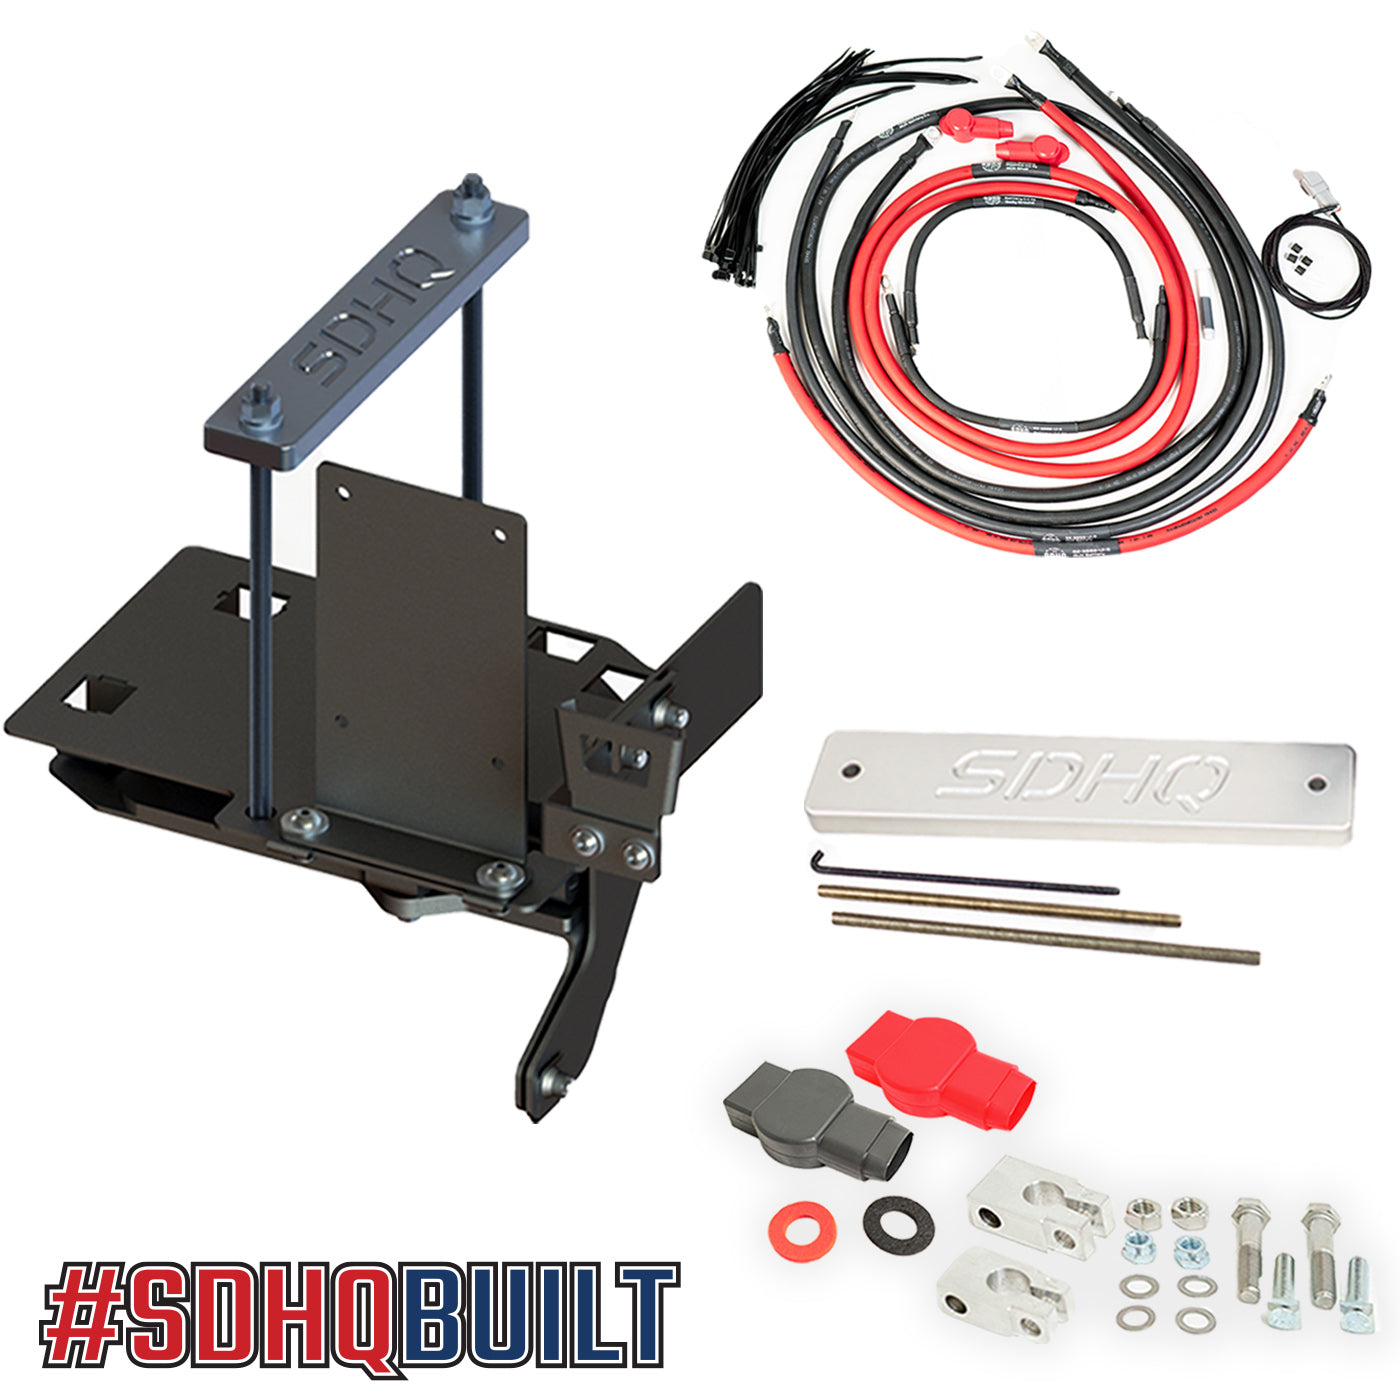 '07-21 Toyota Tundra SDHQ Built "Build your Own" Dual Battery Kit parts